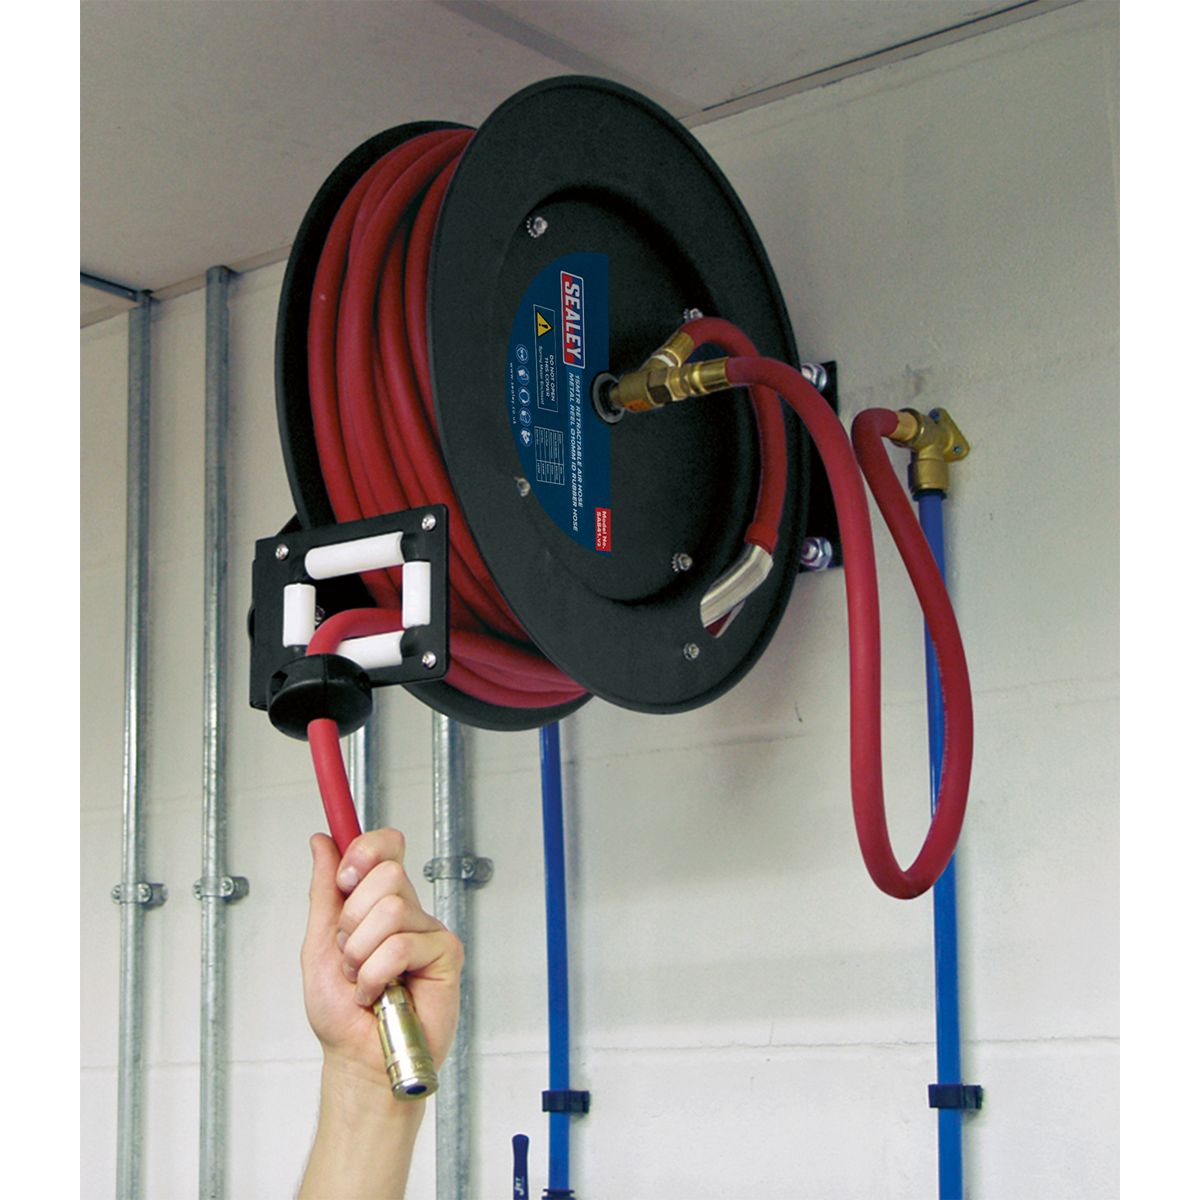 Retractable Air Hose Reels  Buy Online at First Mats UK